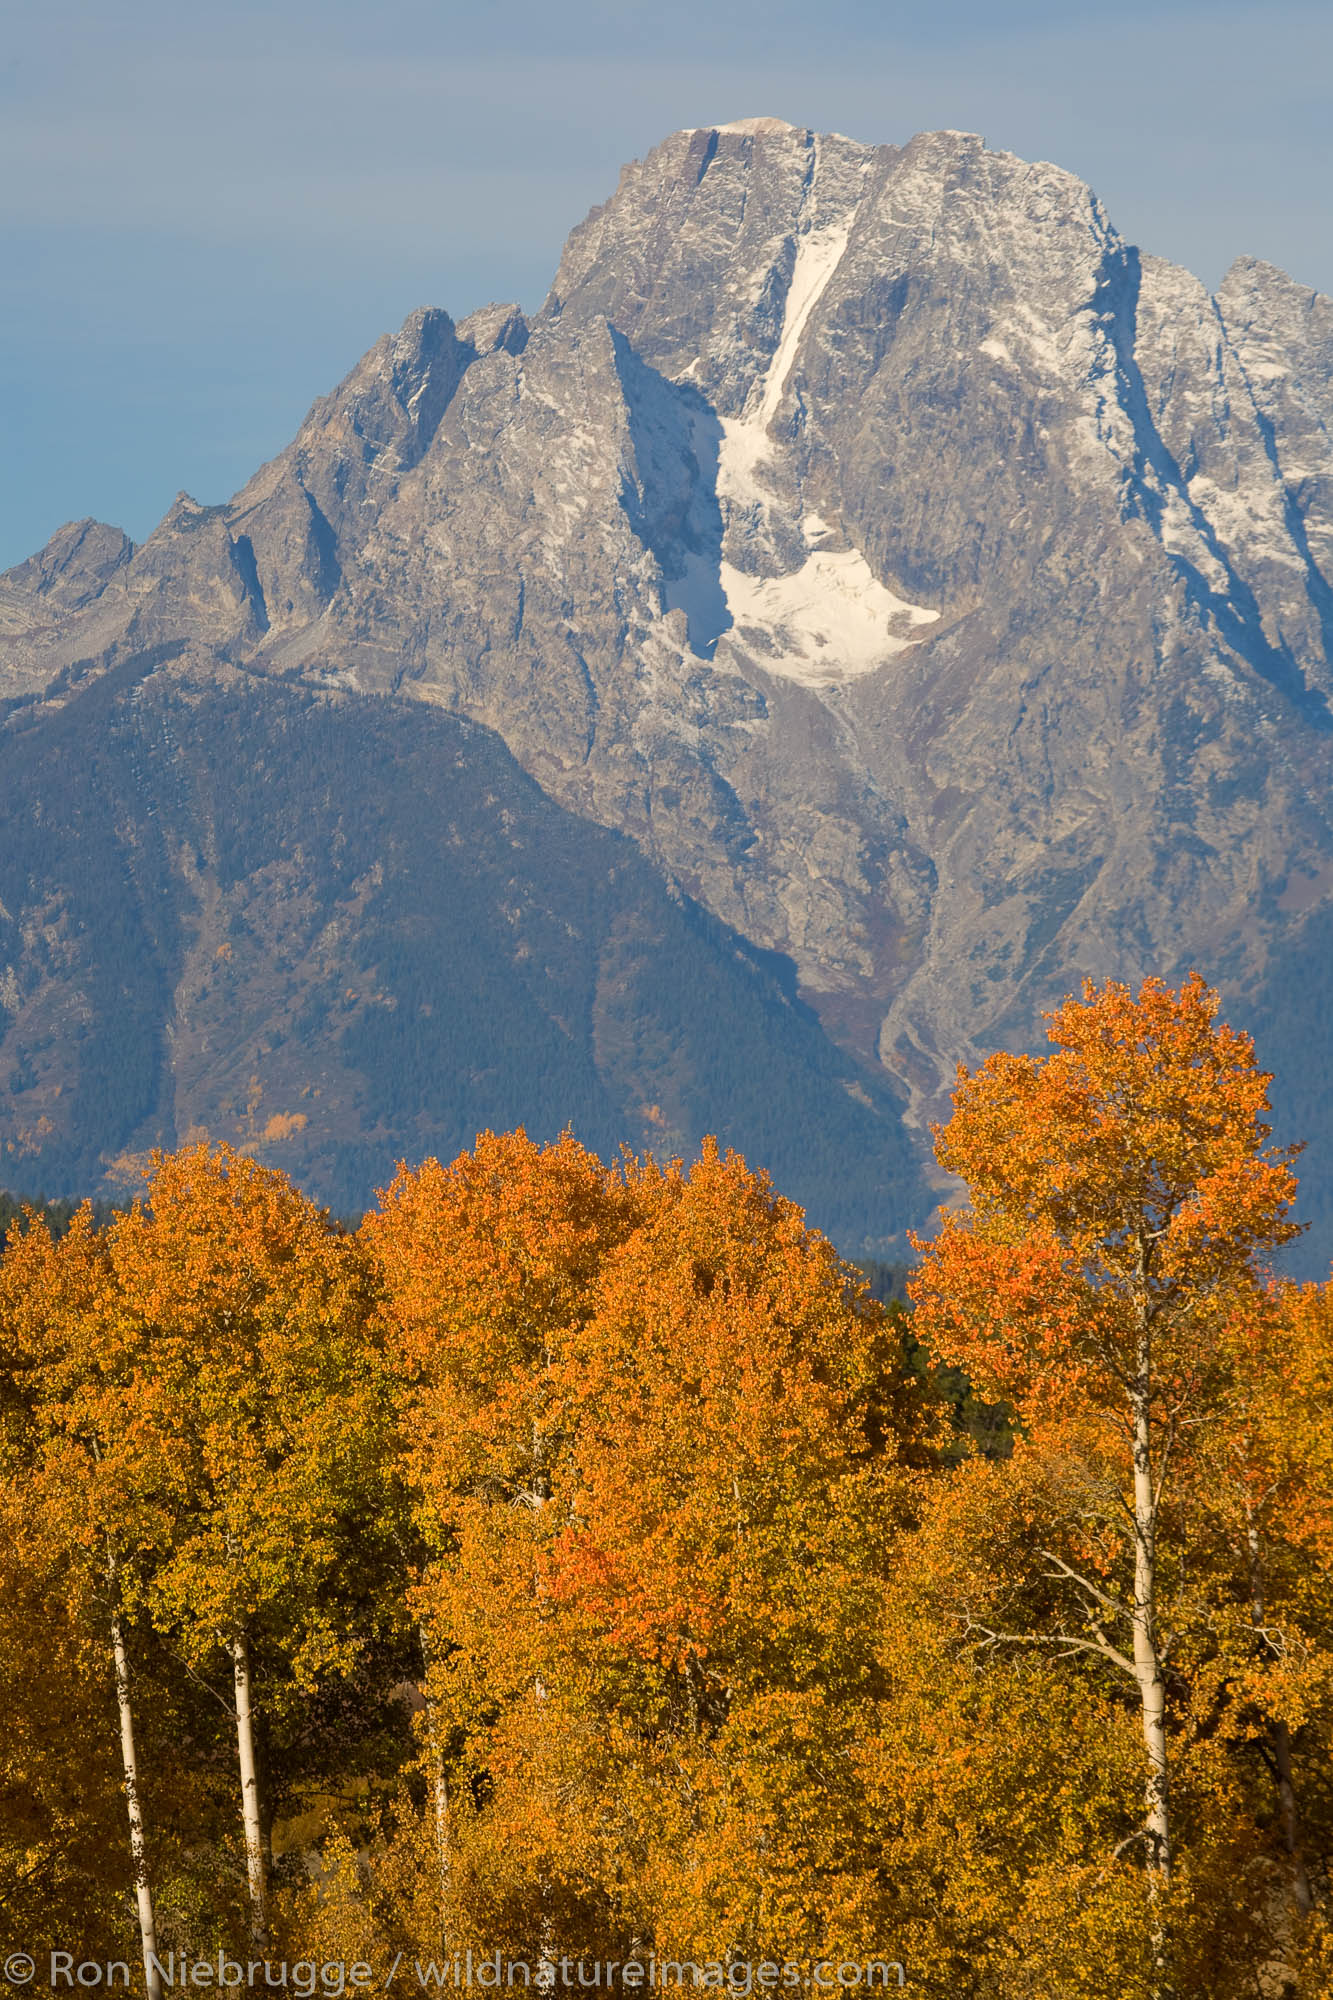 Mount Moran from Oxbow Bend, Grand Teton National Park, Wyoming.